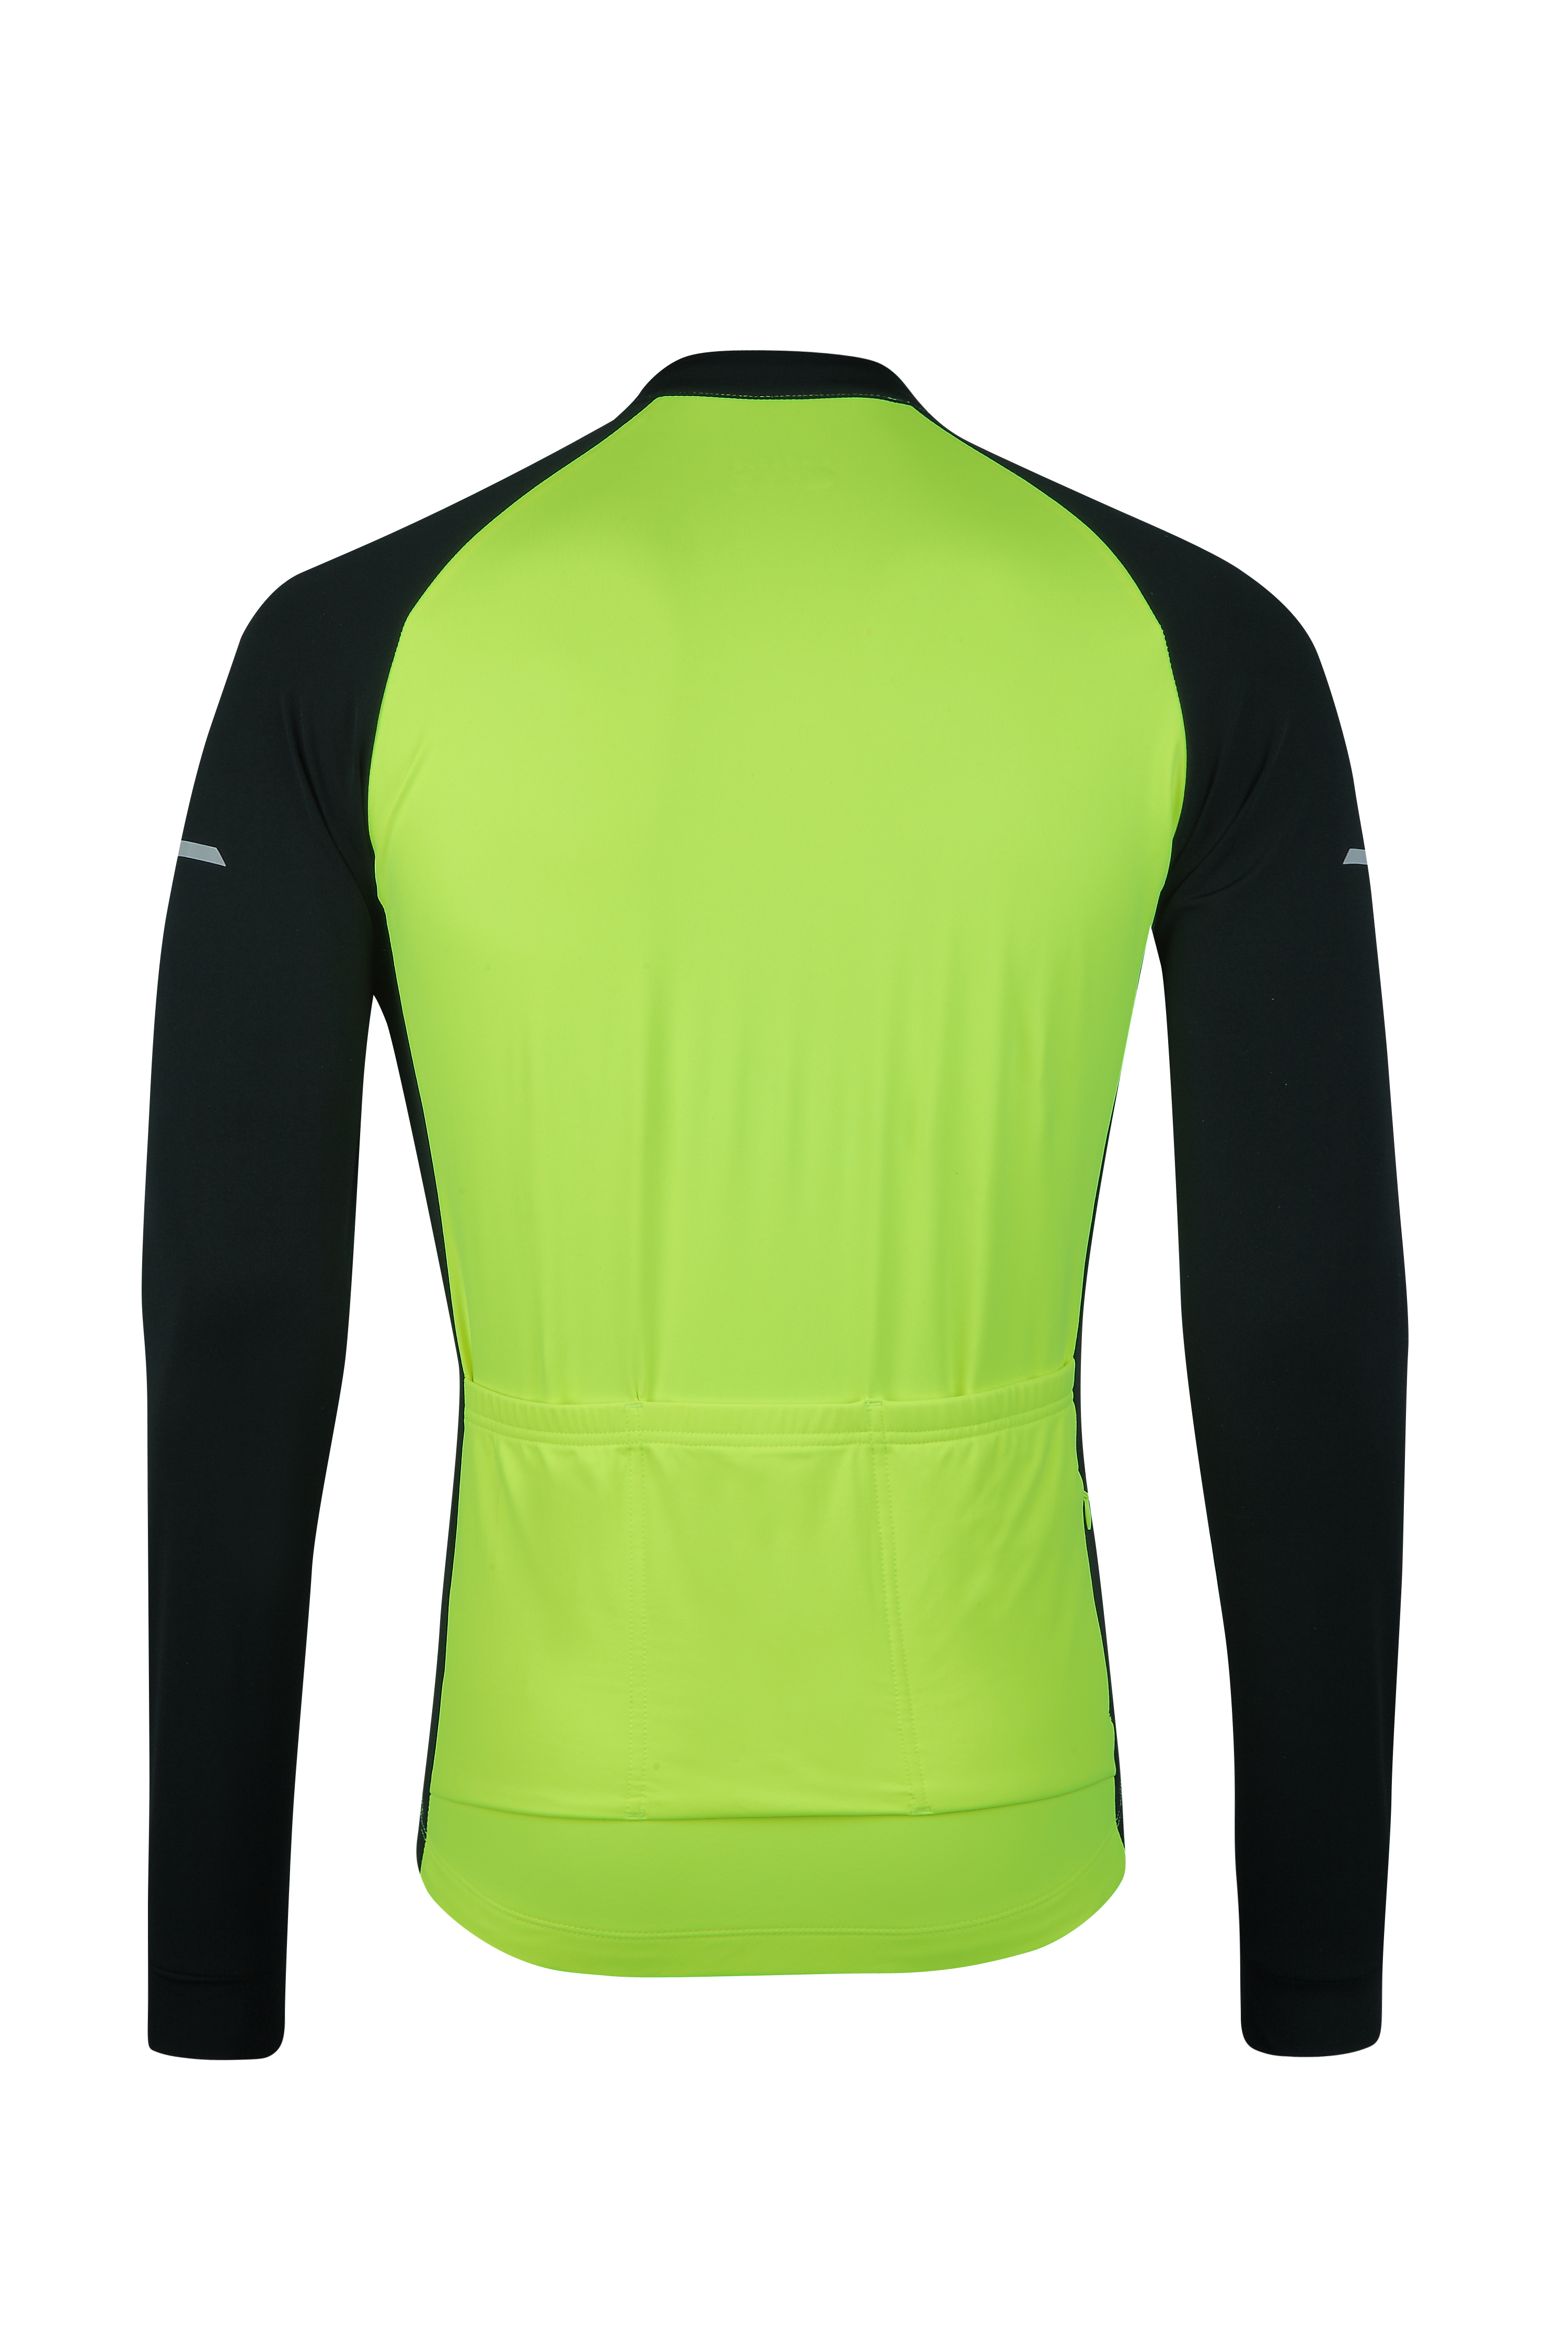 Men’s knitted cycling L/S Jersey.